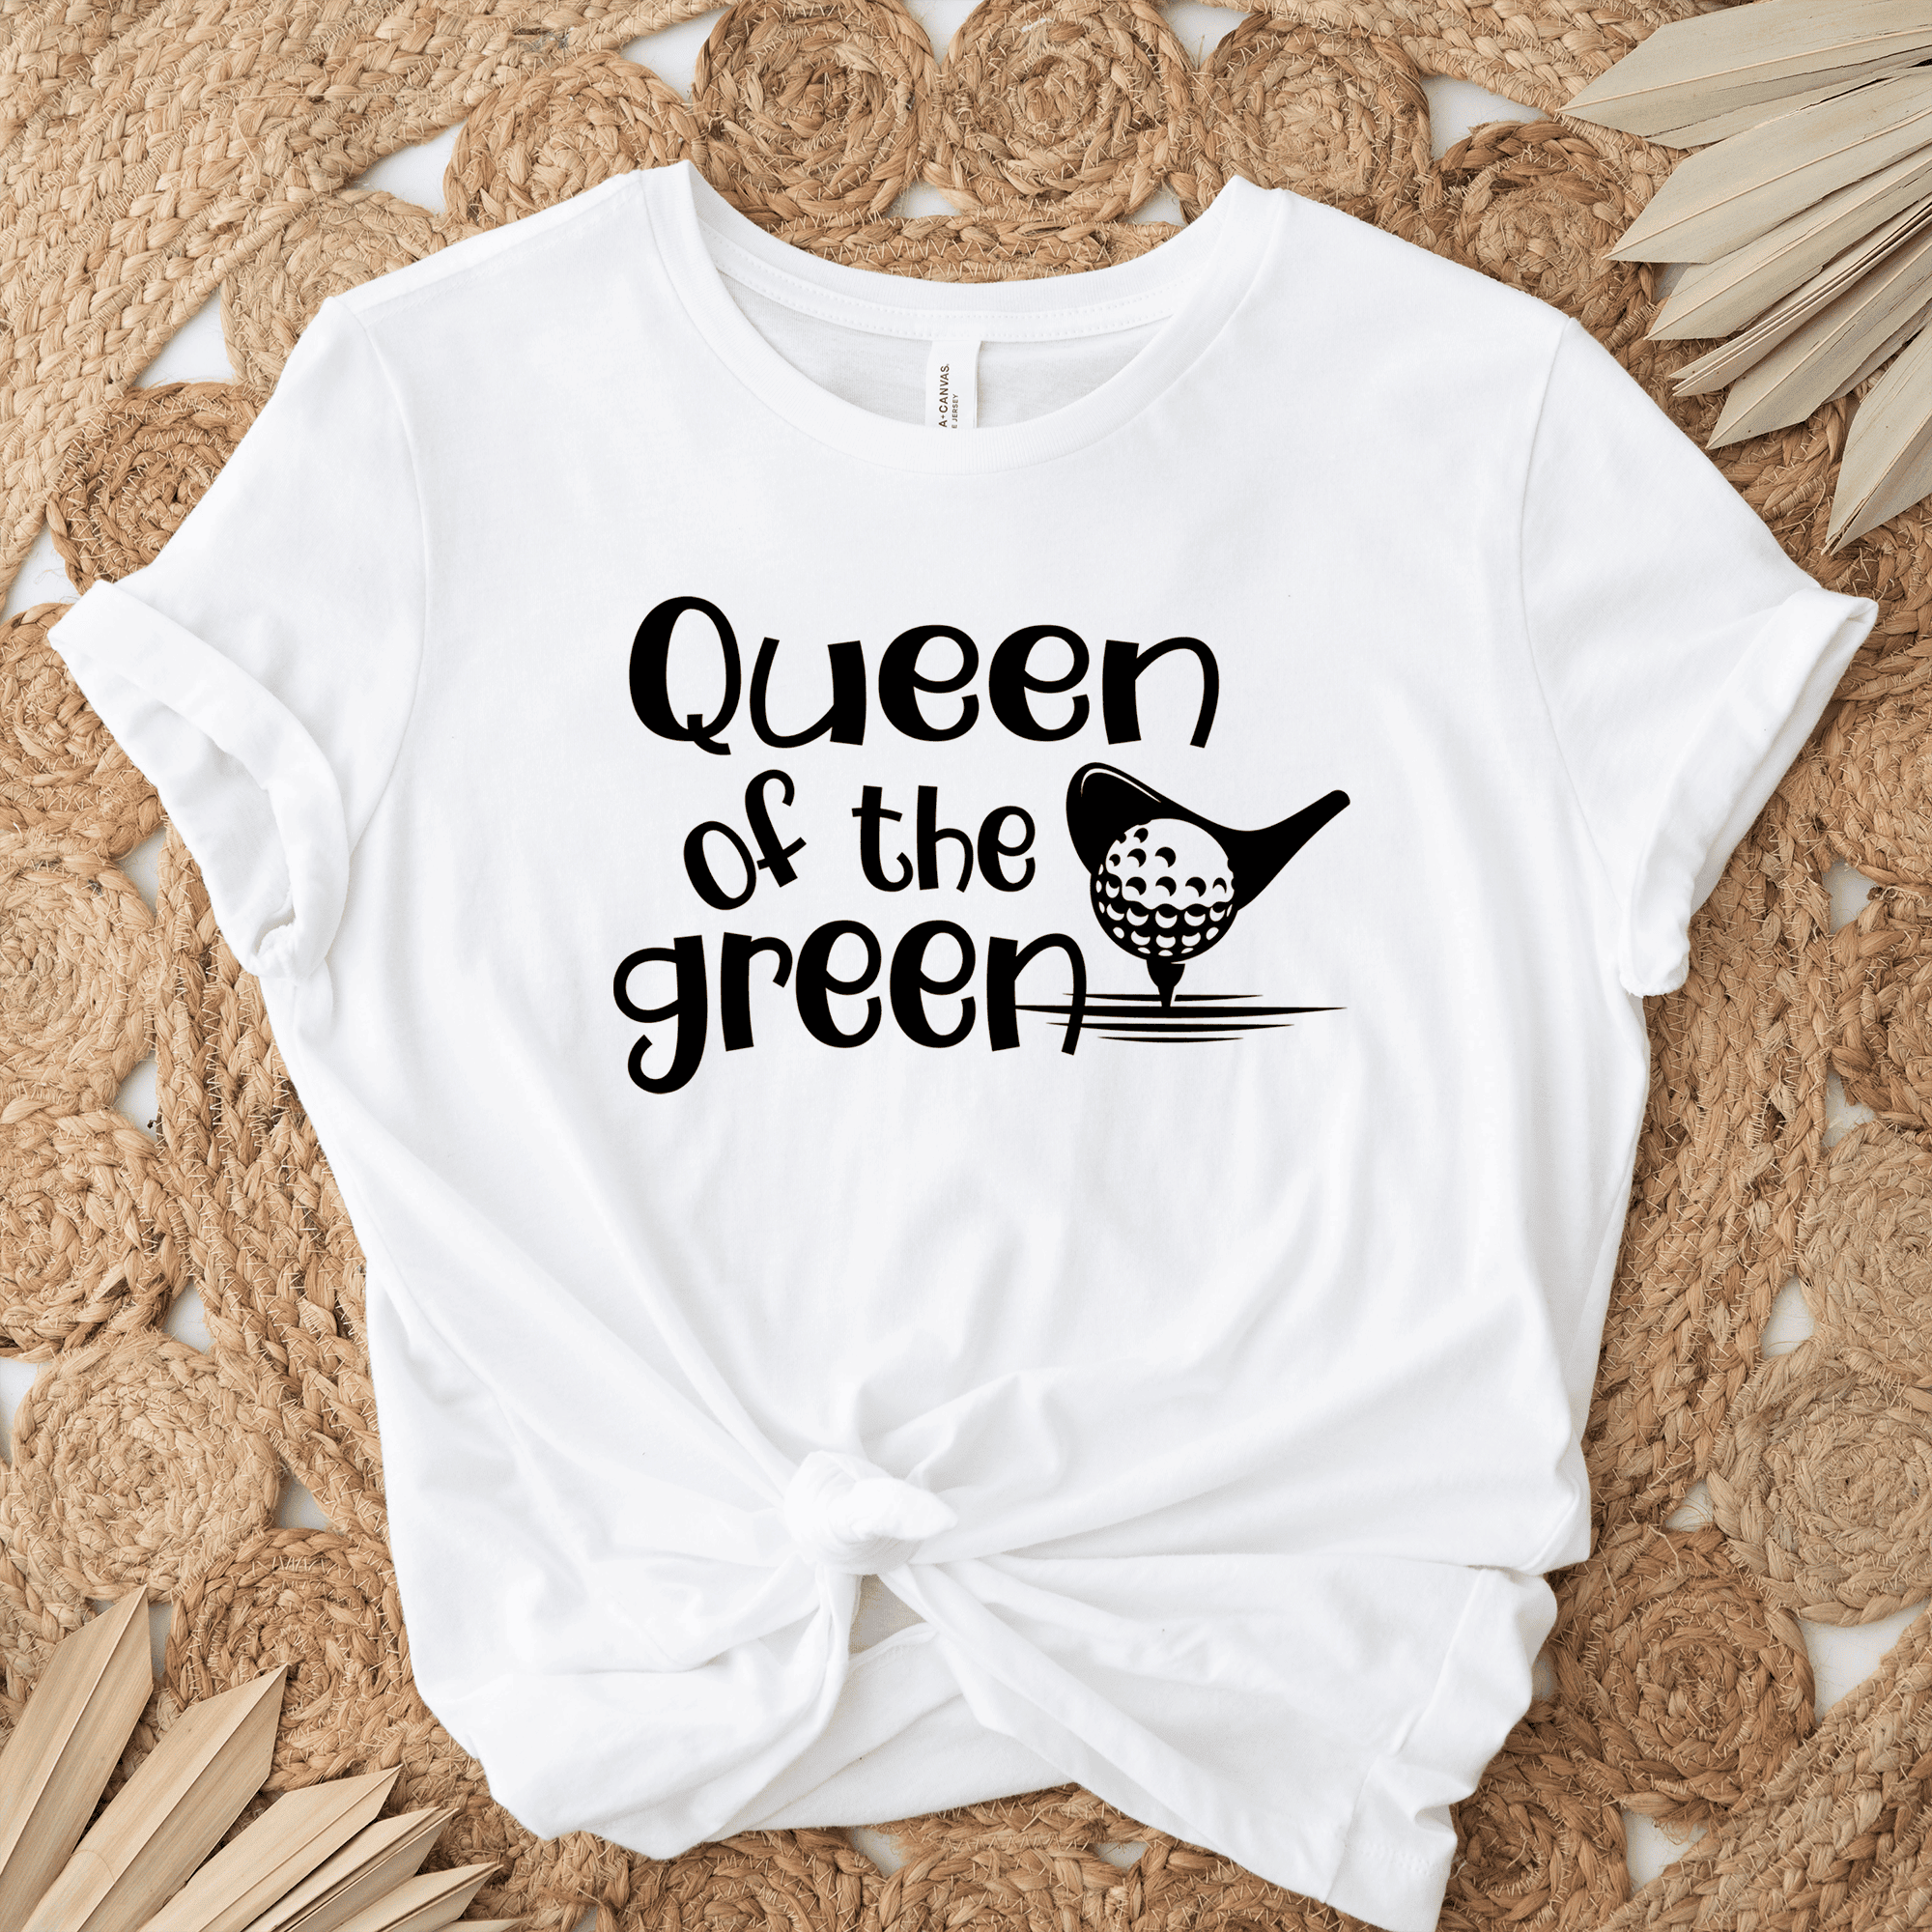 Womens White T Shirt with Queen-Of-The-Green design